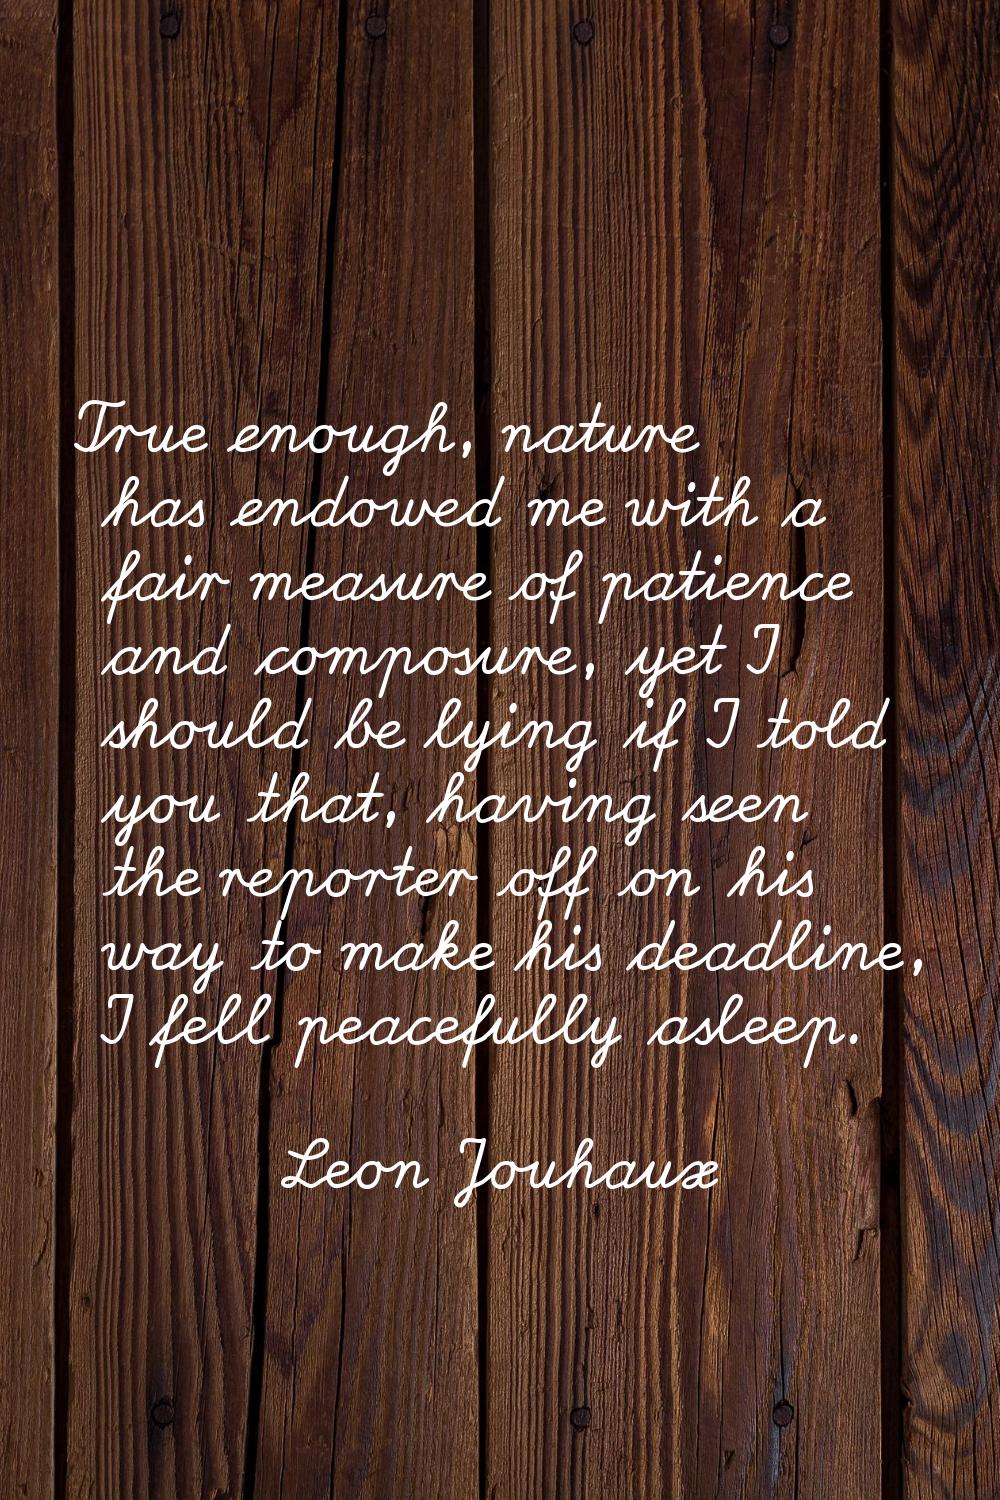 True enough, nature has endowed me with a fair measure of patience and composure, yet I should be l